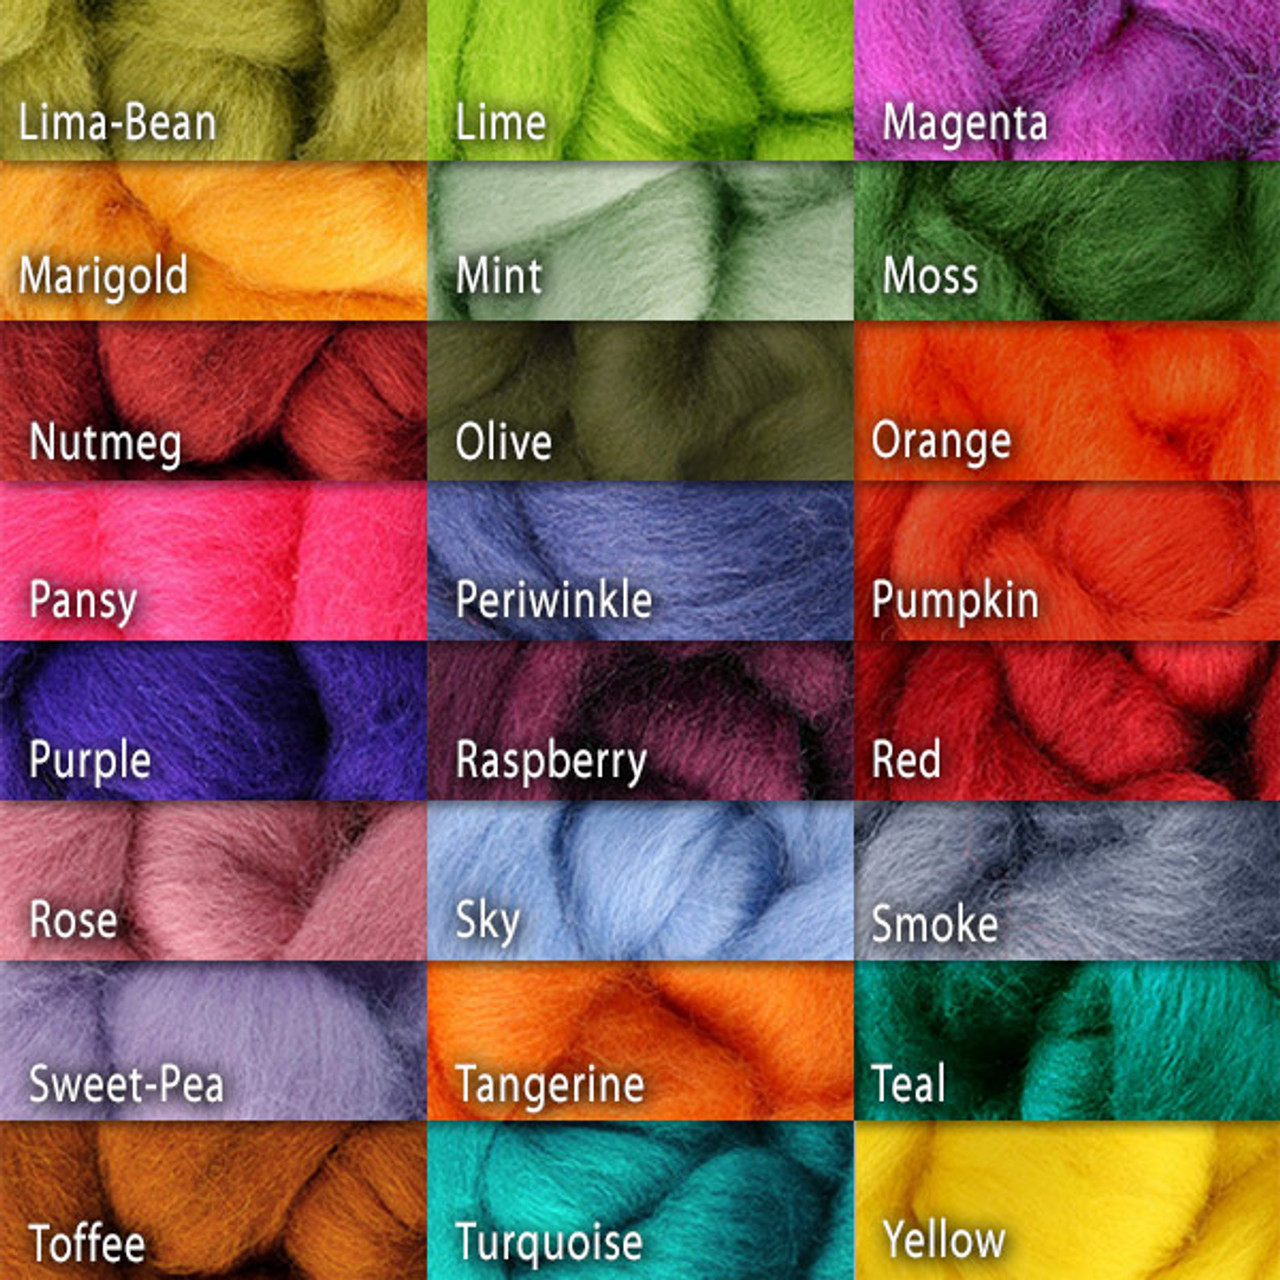 Corriedale Carded Wool Roving-Pale Amber – Mohair & More